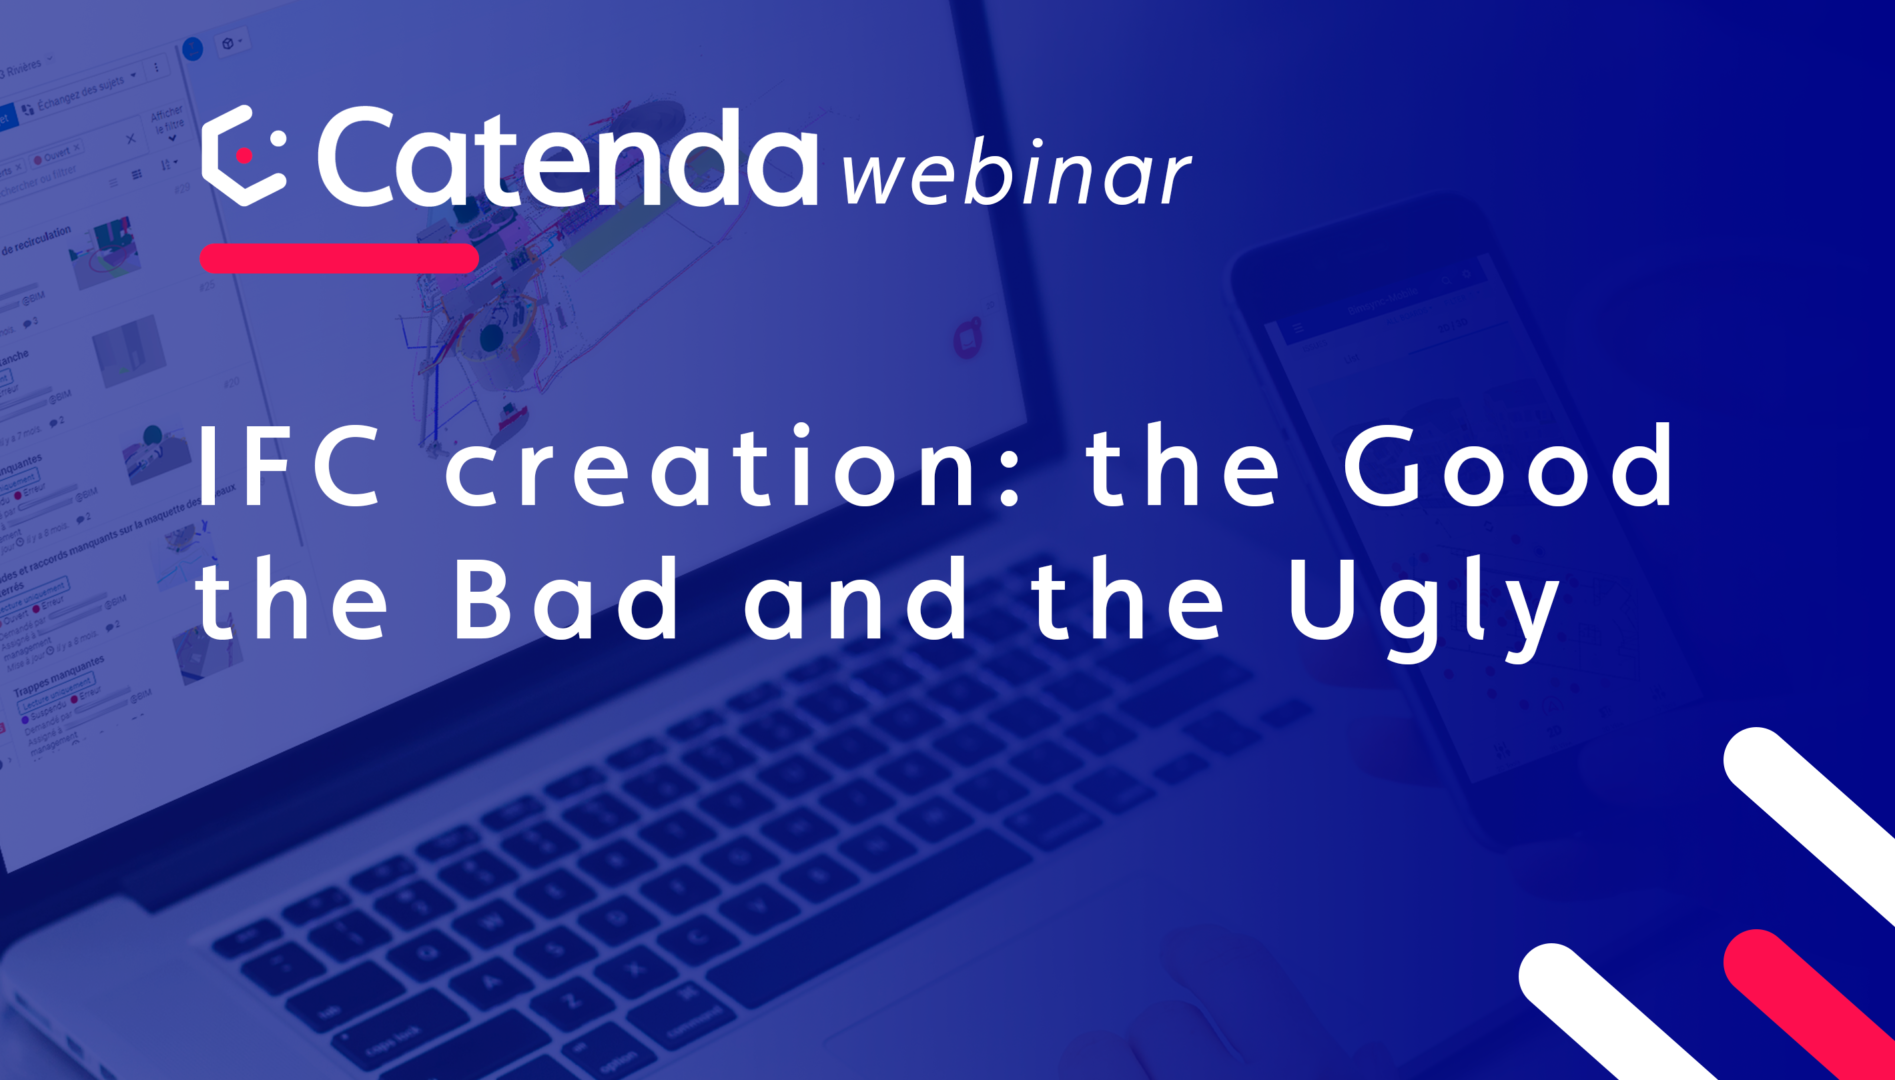 Catenda webinar banner with the topic IFC creation: the Good the Bad and the Ugly